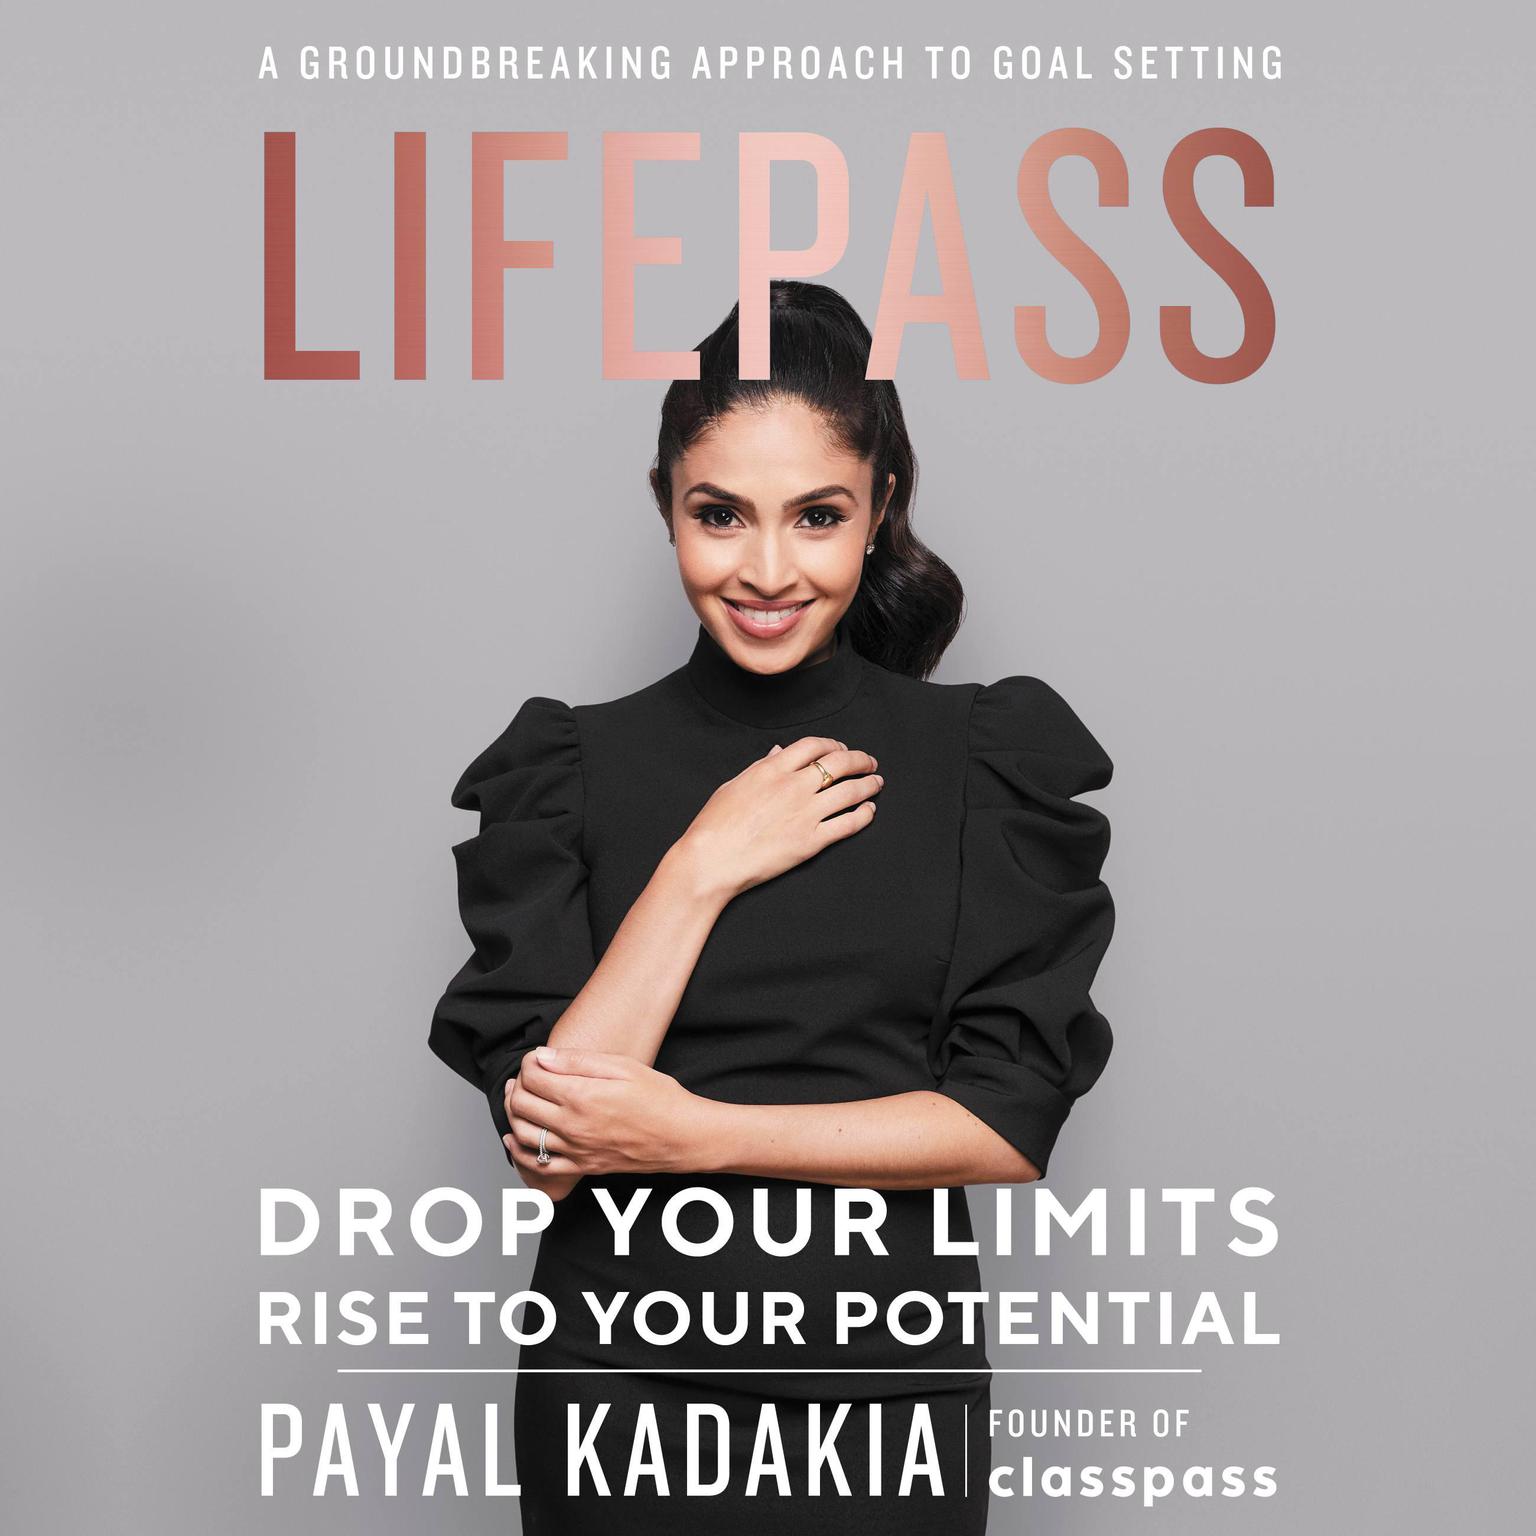 LifePass: Drop Your Limits, Rise to Your Potential - A Groundbreaking Approach to Goal Setting Audiobook, by Payal Kadakia